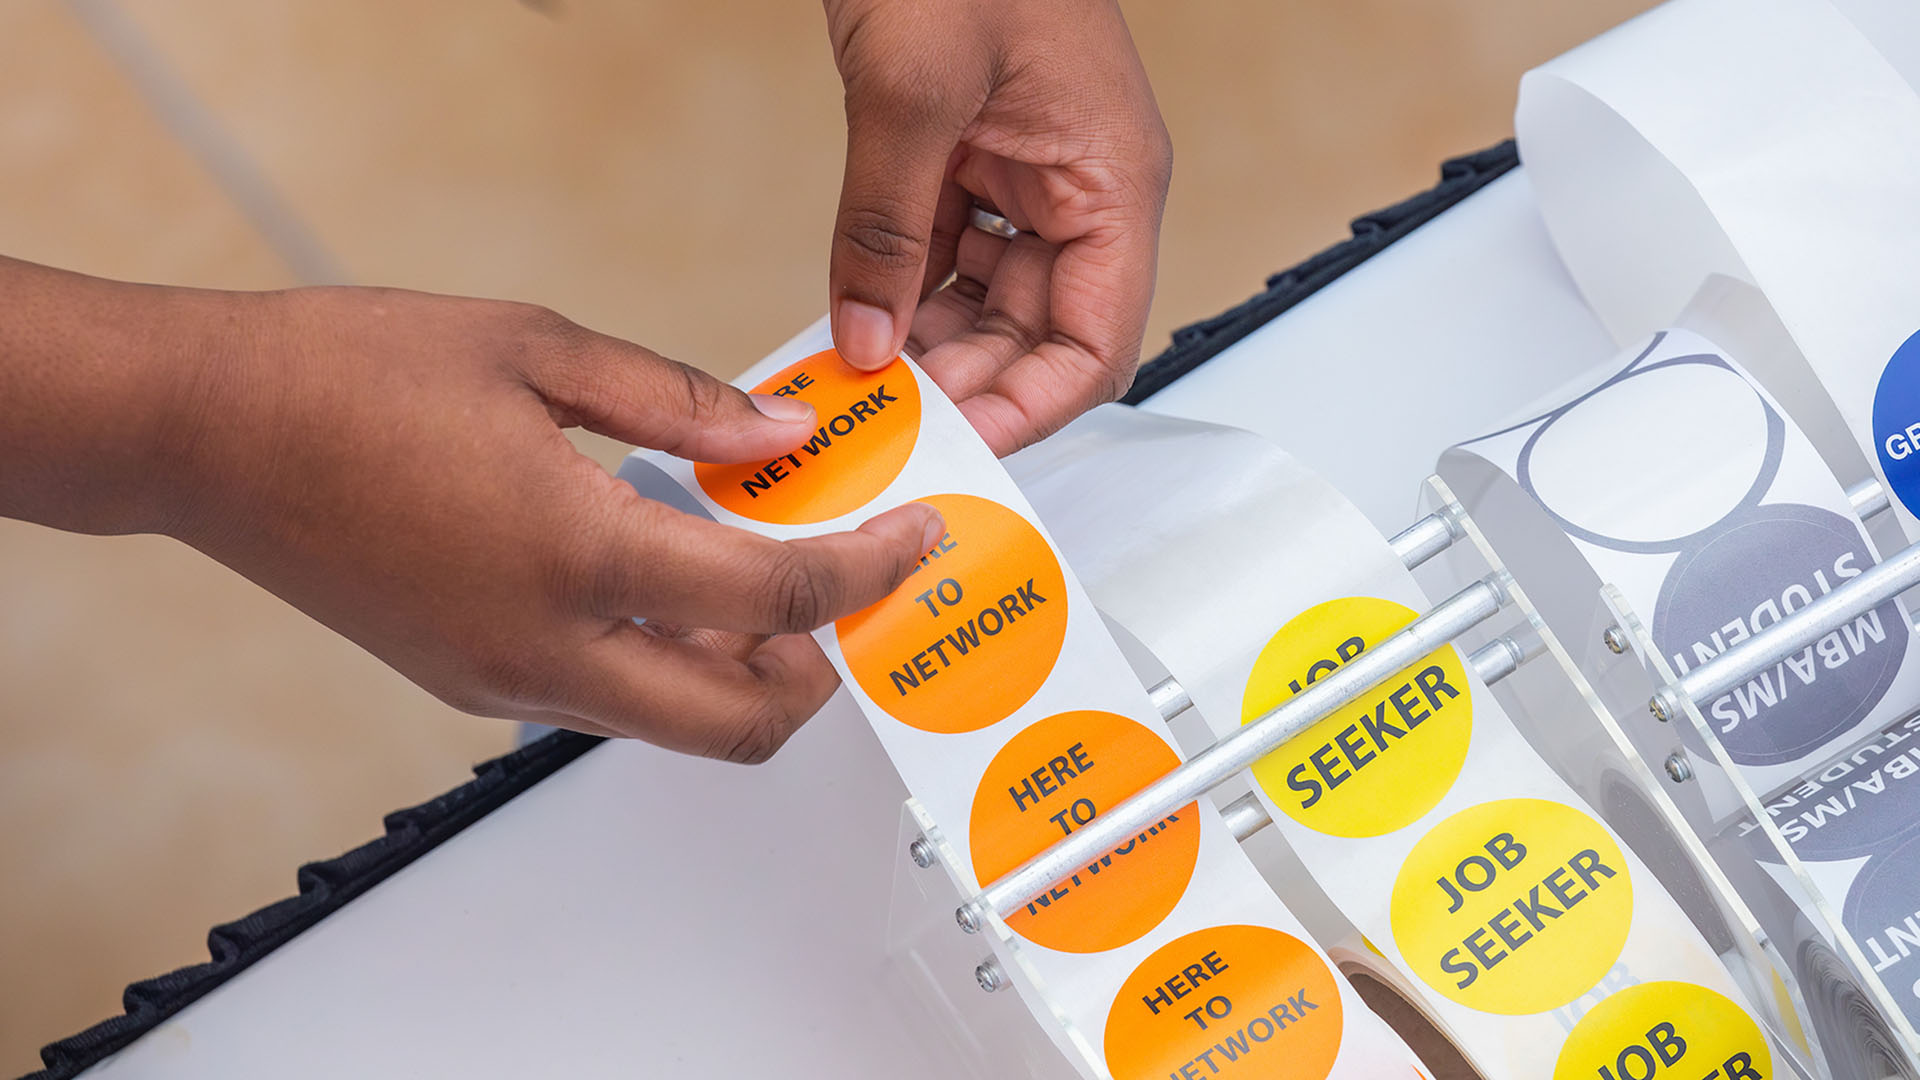 A person's hands reaching for an orange sticker that says "networking"